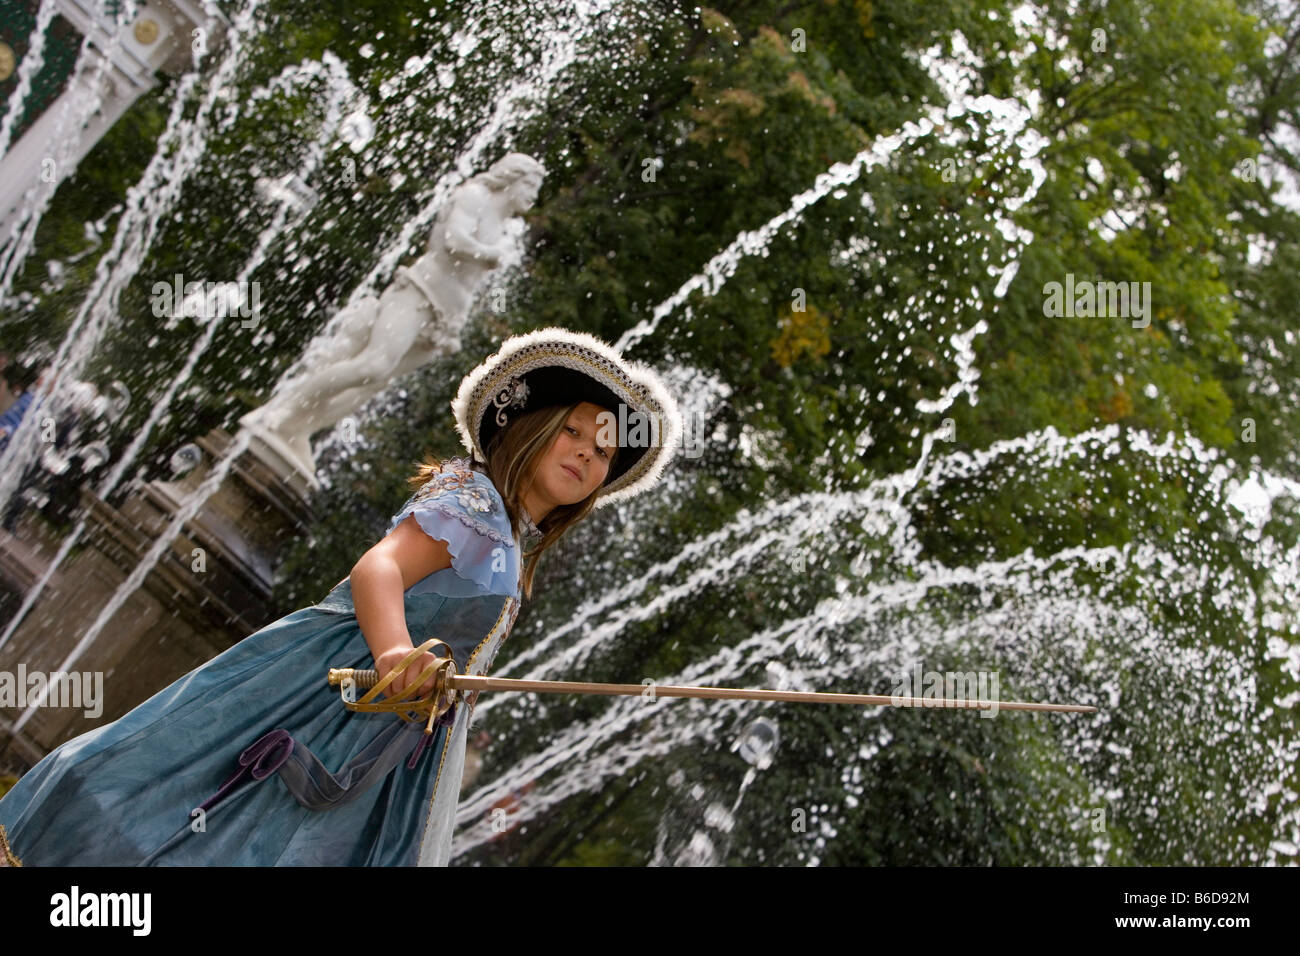 Russia, Saint Petersburg, Statues and fountains in the garden of Peterhof, Child changed as a princess Stock Photo